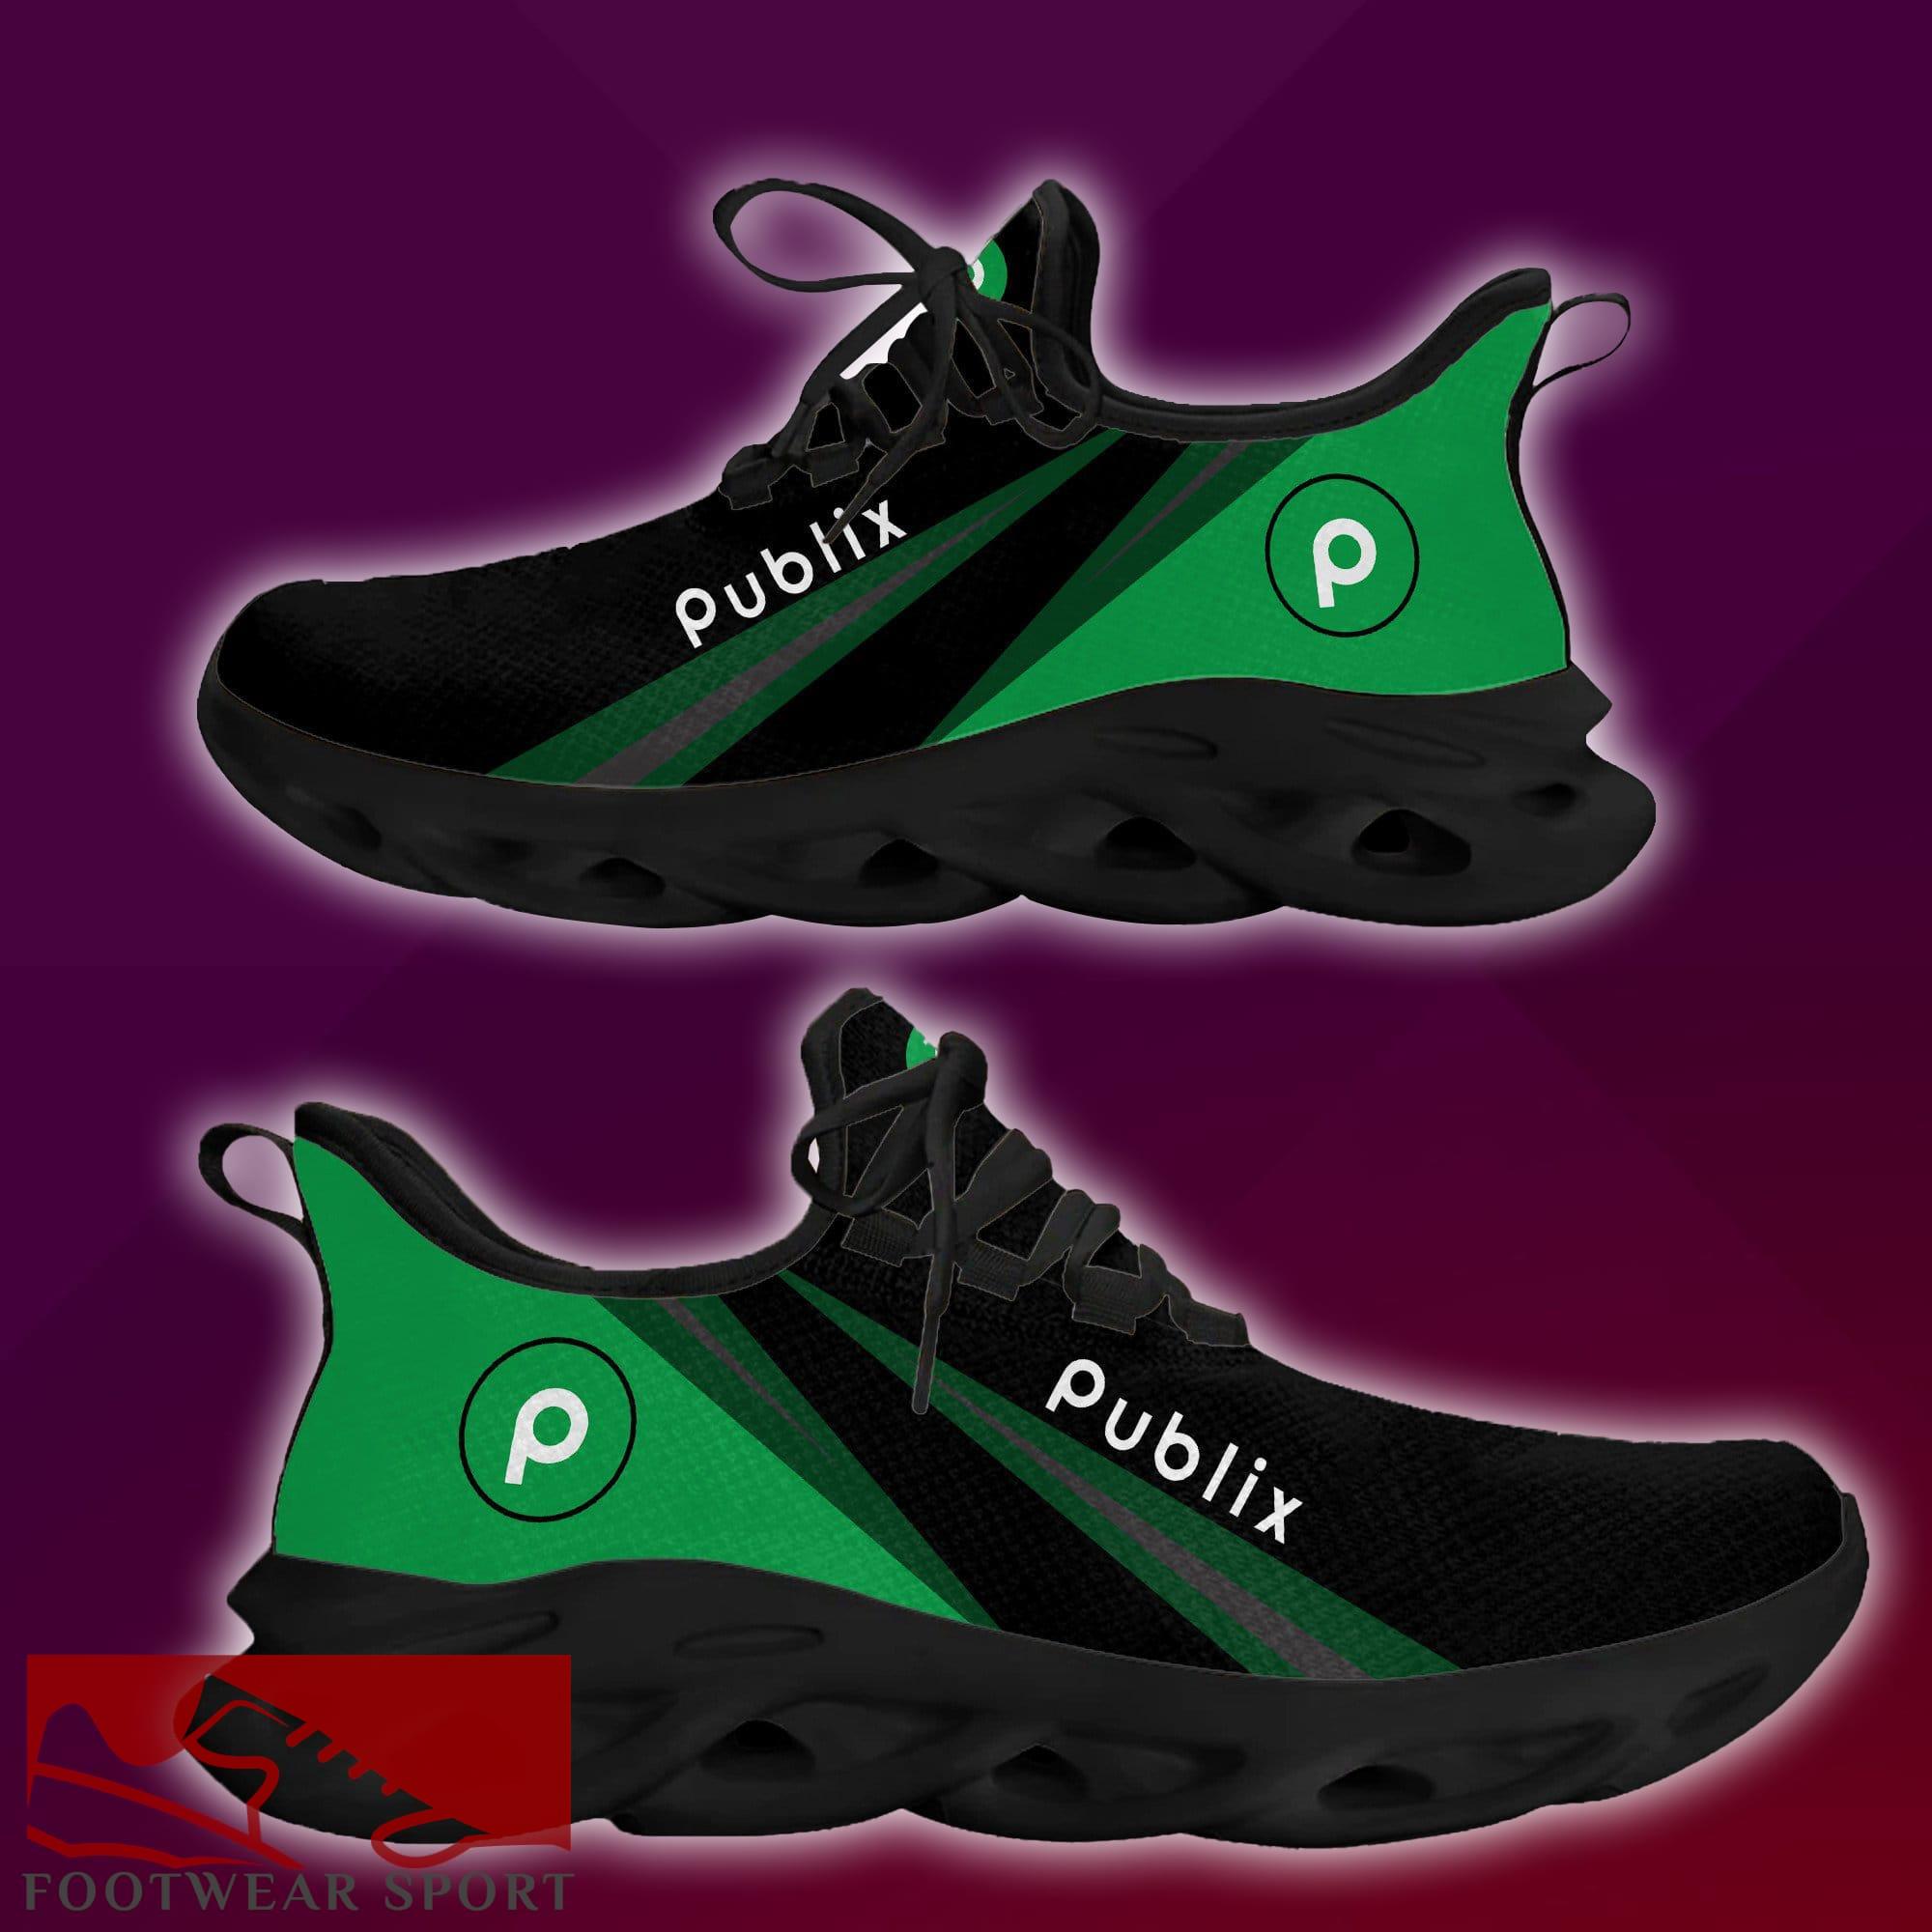 publix Brand New Logo Max Soul Sneakers Design Running Shoes Gift - publix New Brand Chunky Shoes Style Max Soul Sneakers Photo 1